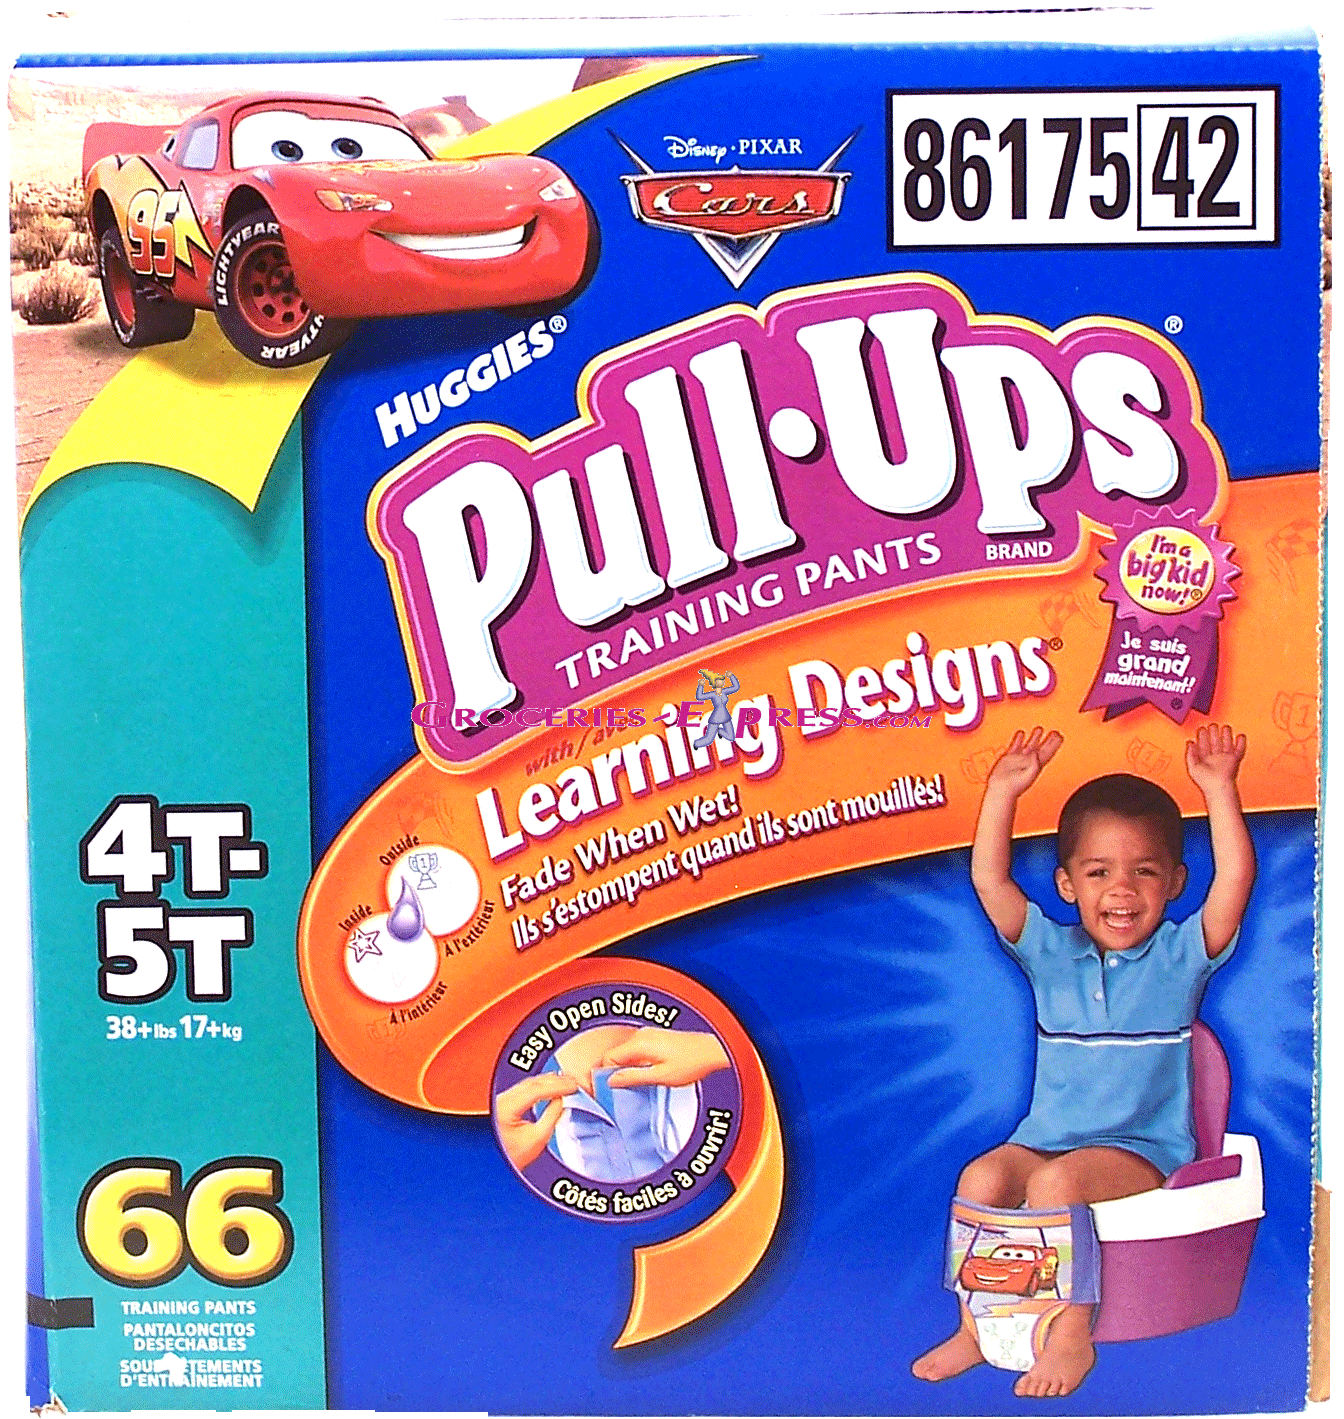 largest size huggies pull ups